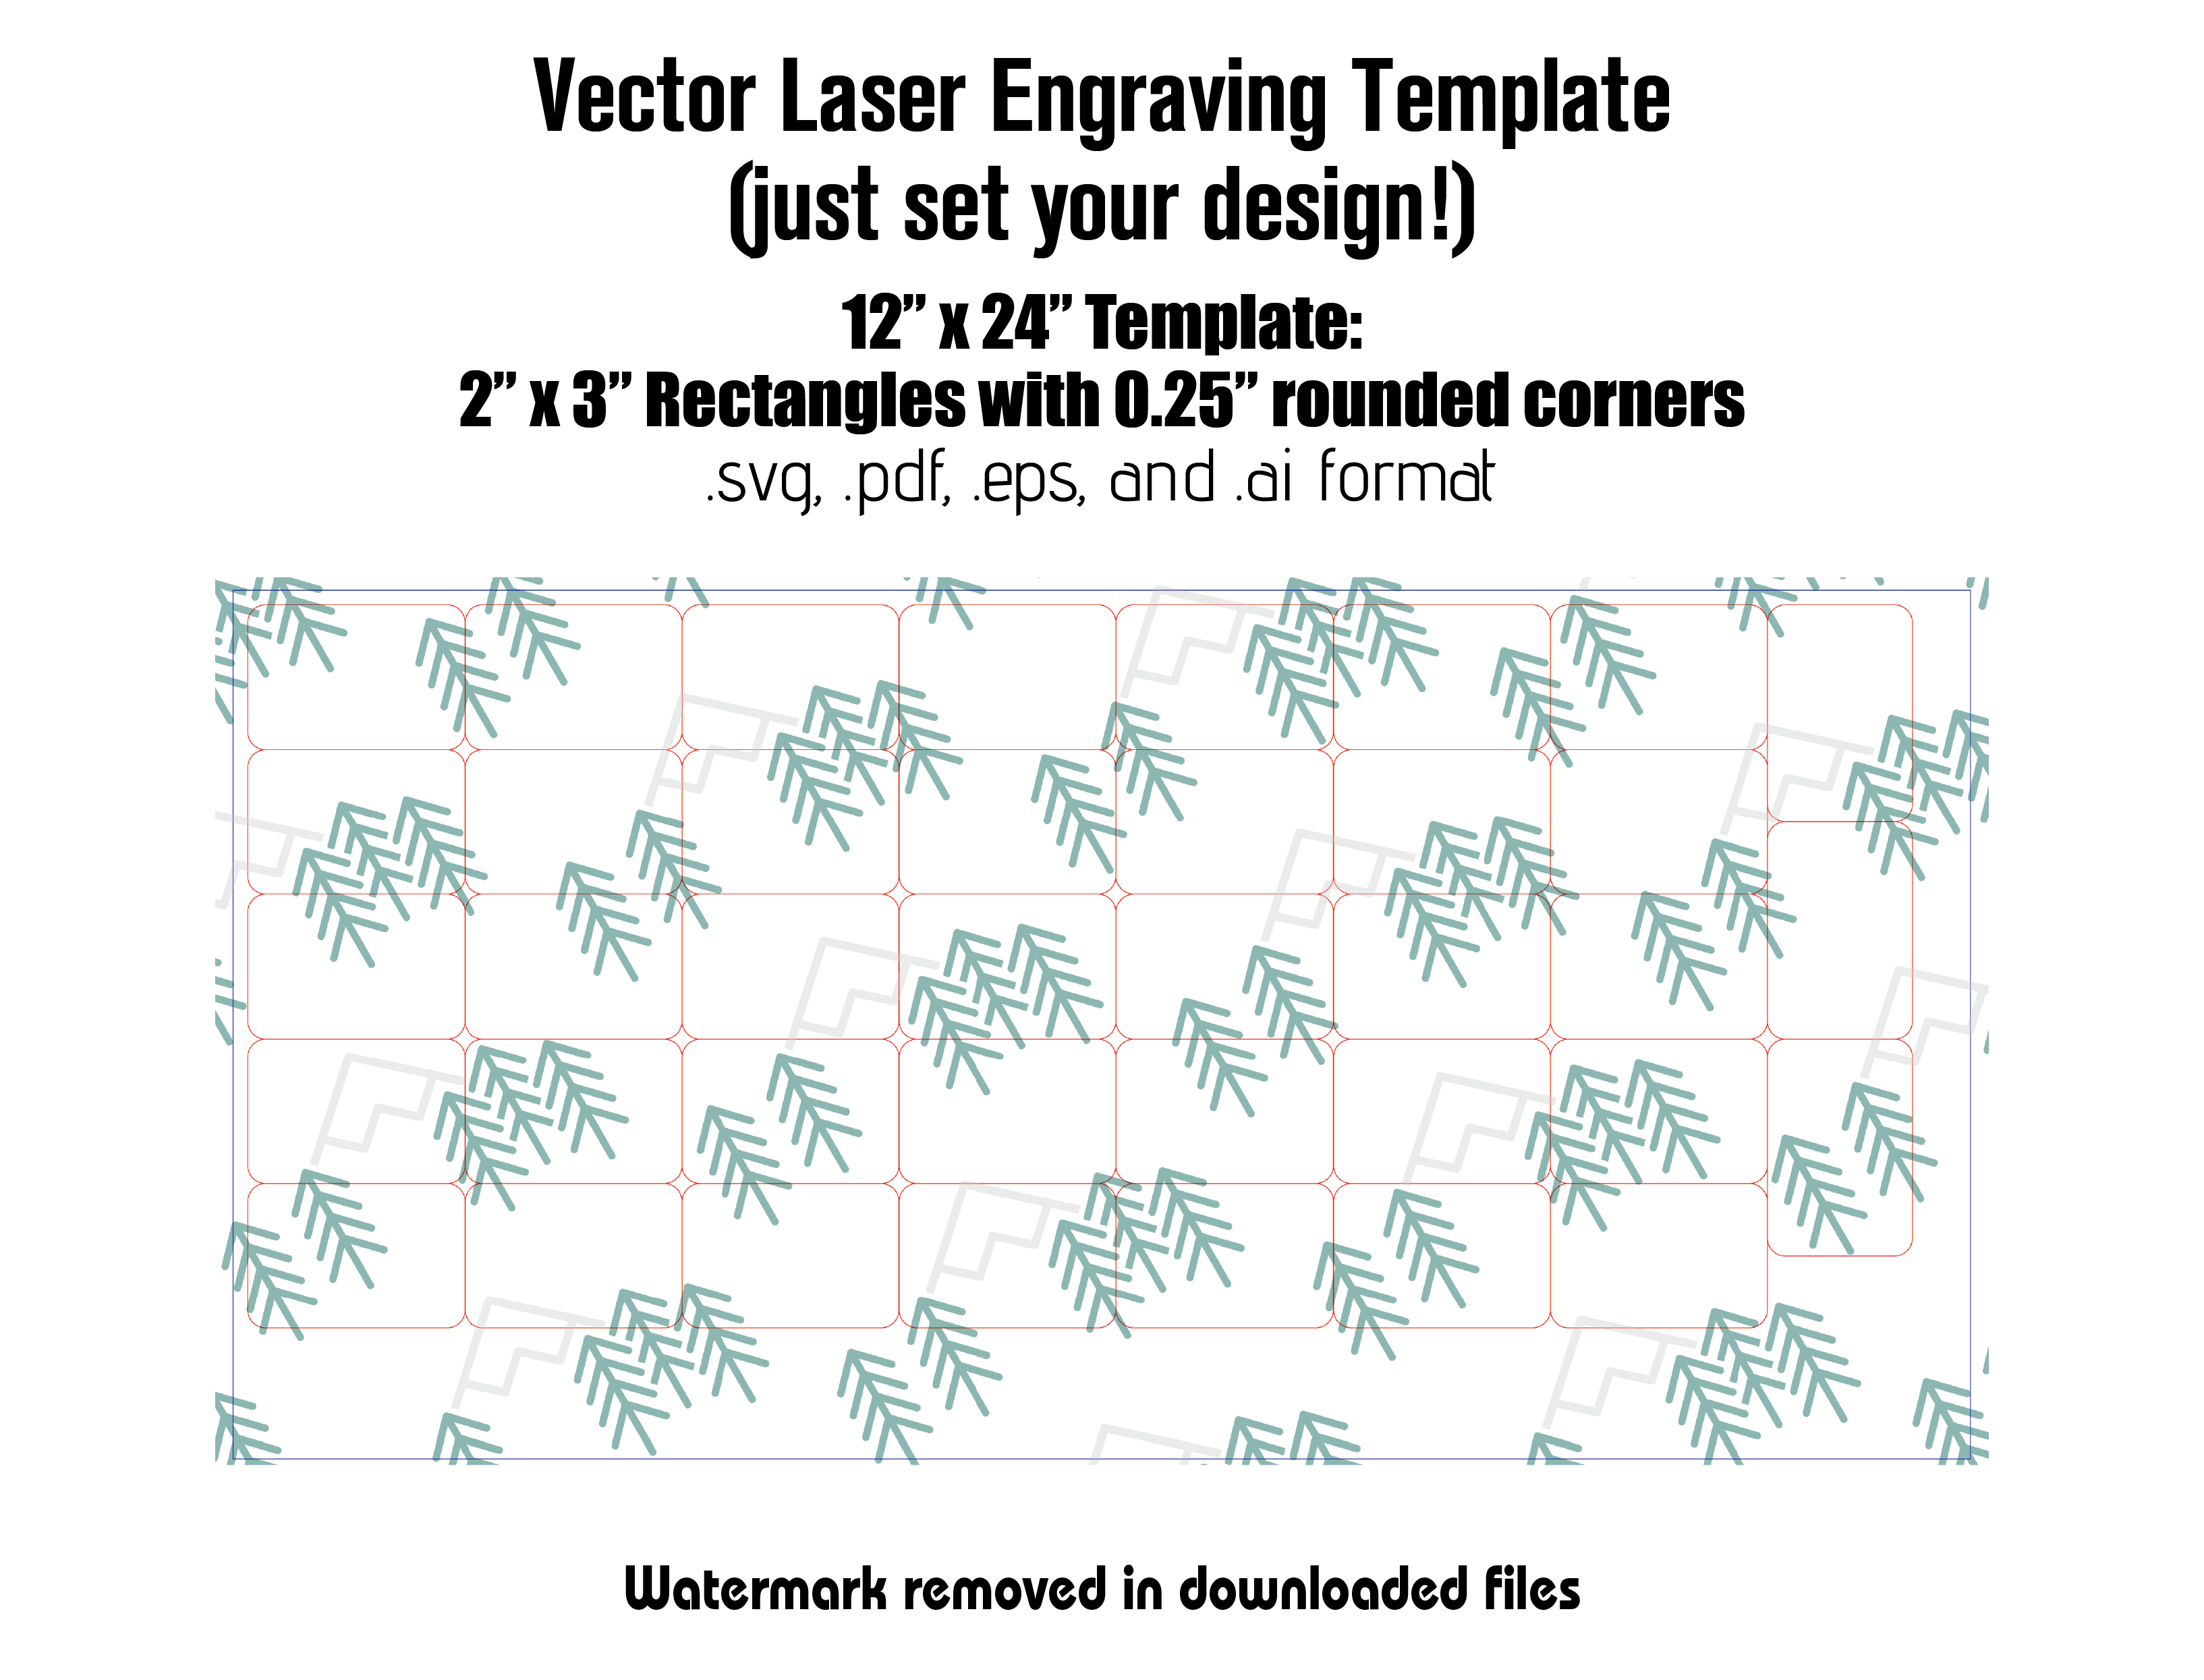 Digital Laser Cutting Template: 2" x 3" Rectangles w/Rounded Corners - 12" x 24" Sheet Size Digital Laser Engraving Files Craftworks NW 